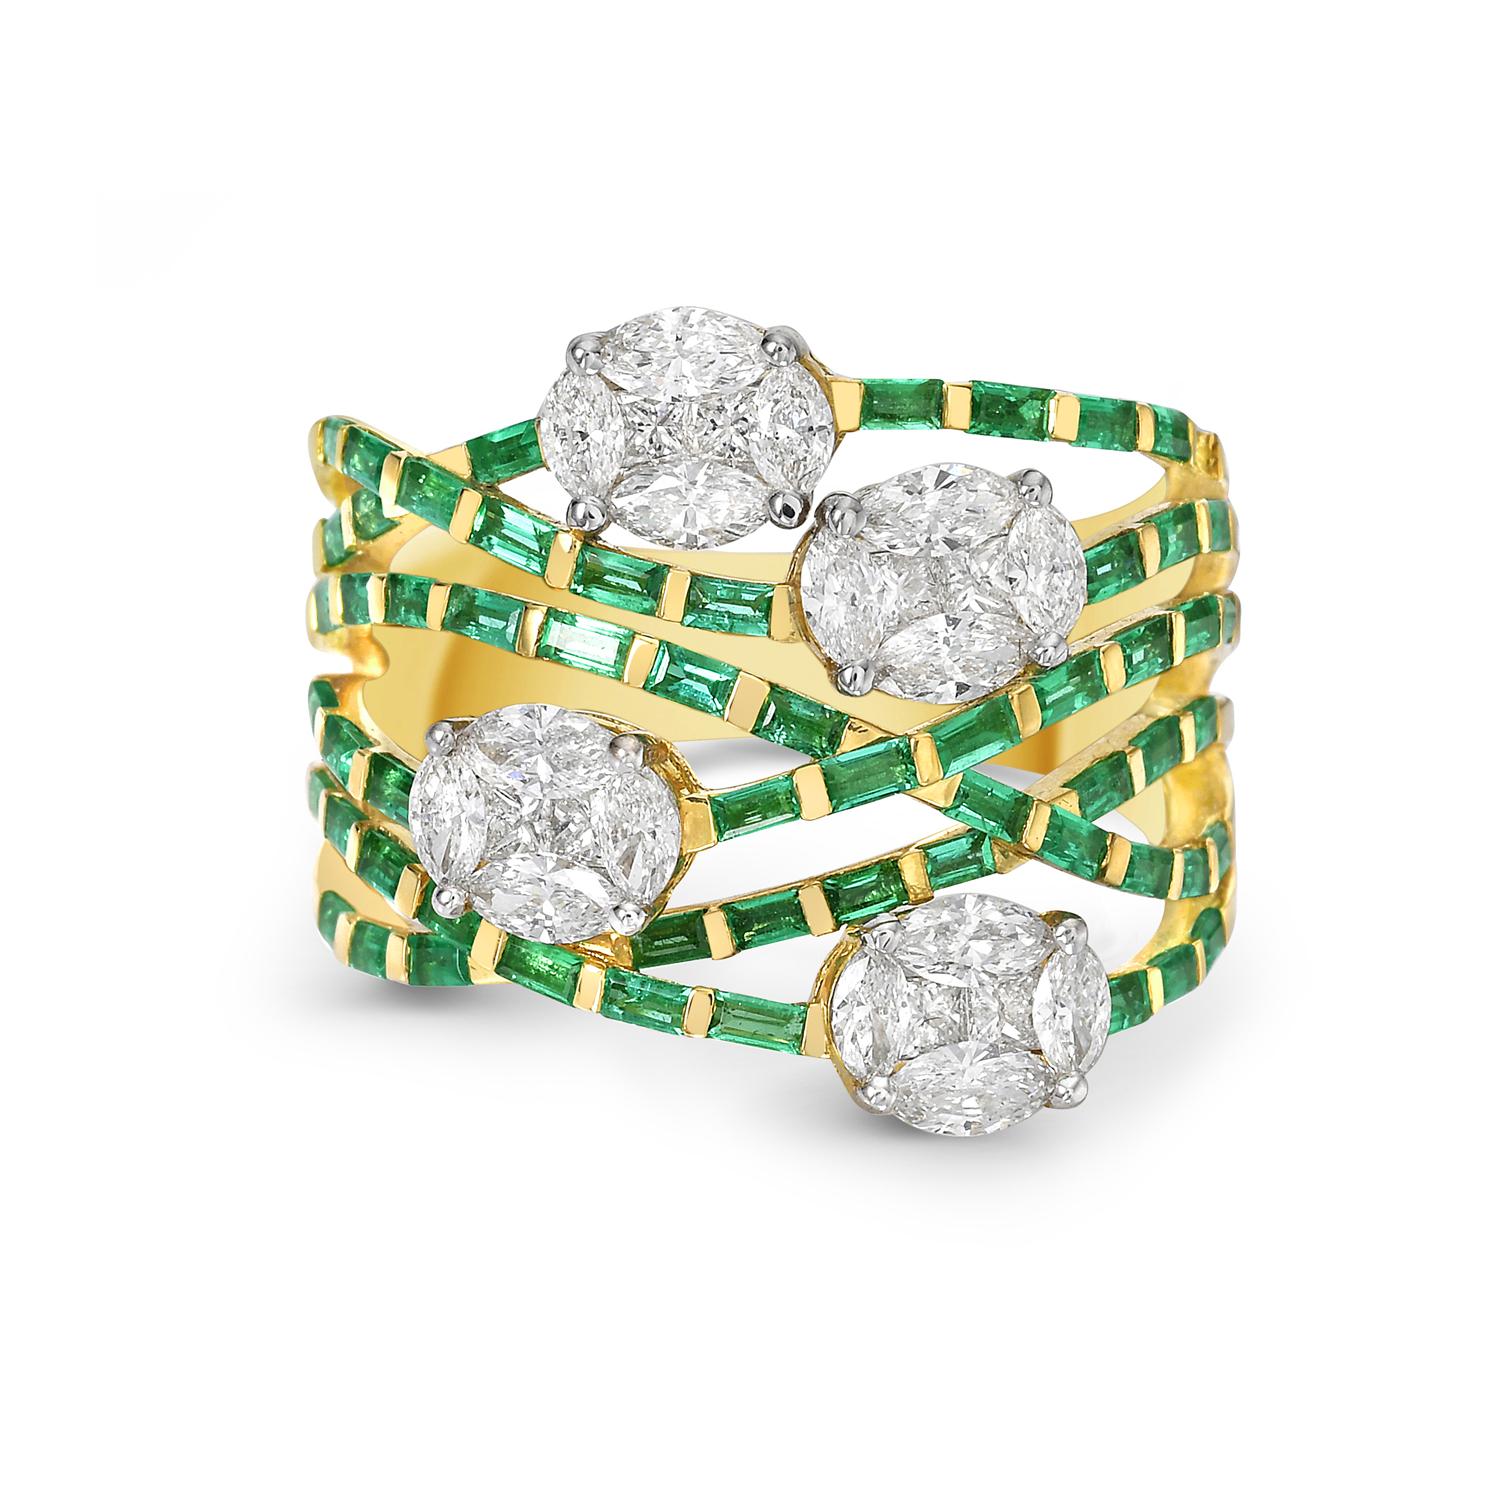 Mixed Cut Zig Zag Emerald Ring Accented With Diamonds Made In 18k Yellow Gold For Sale